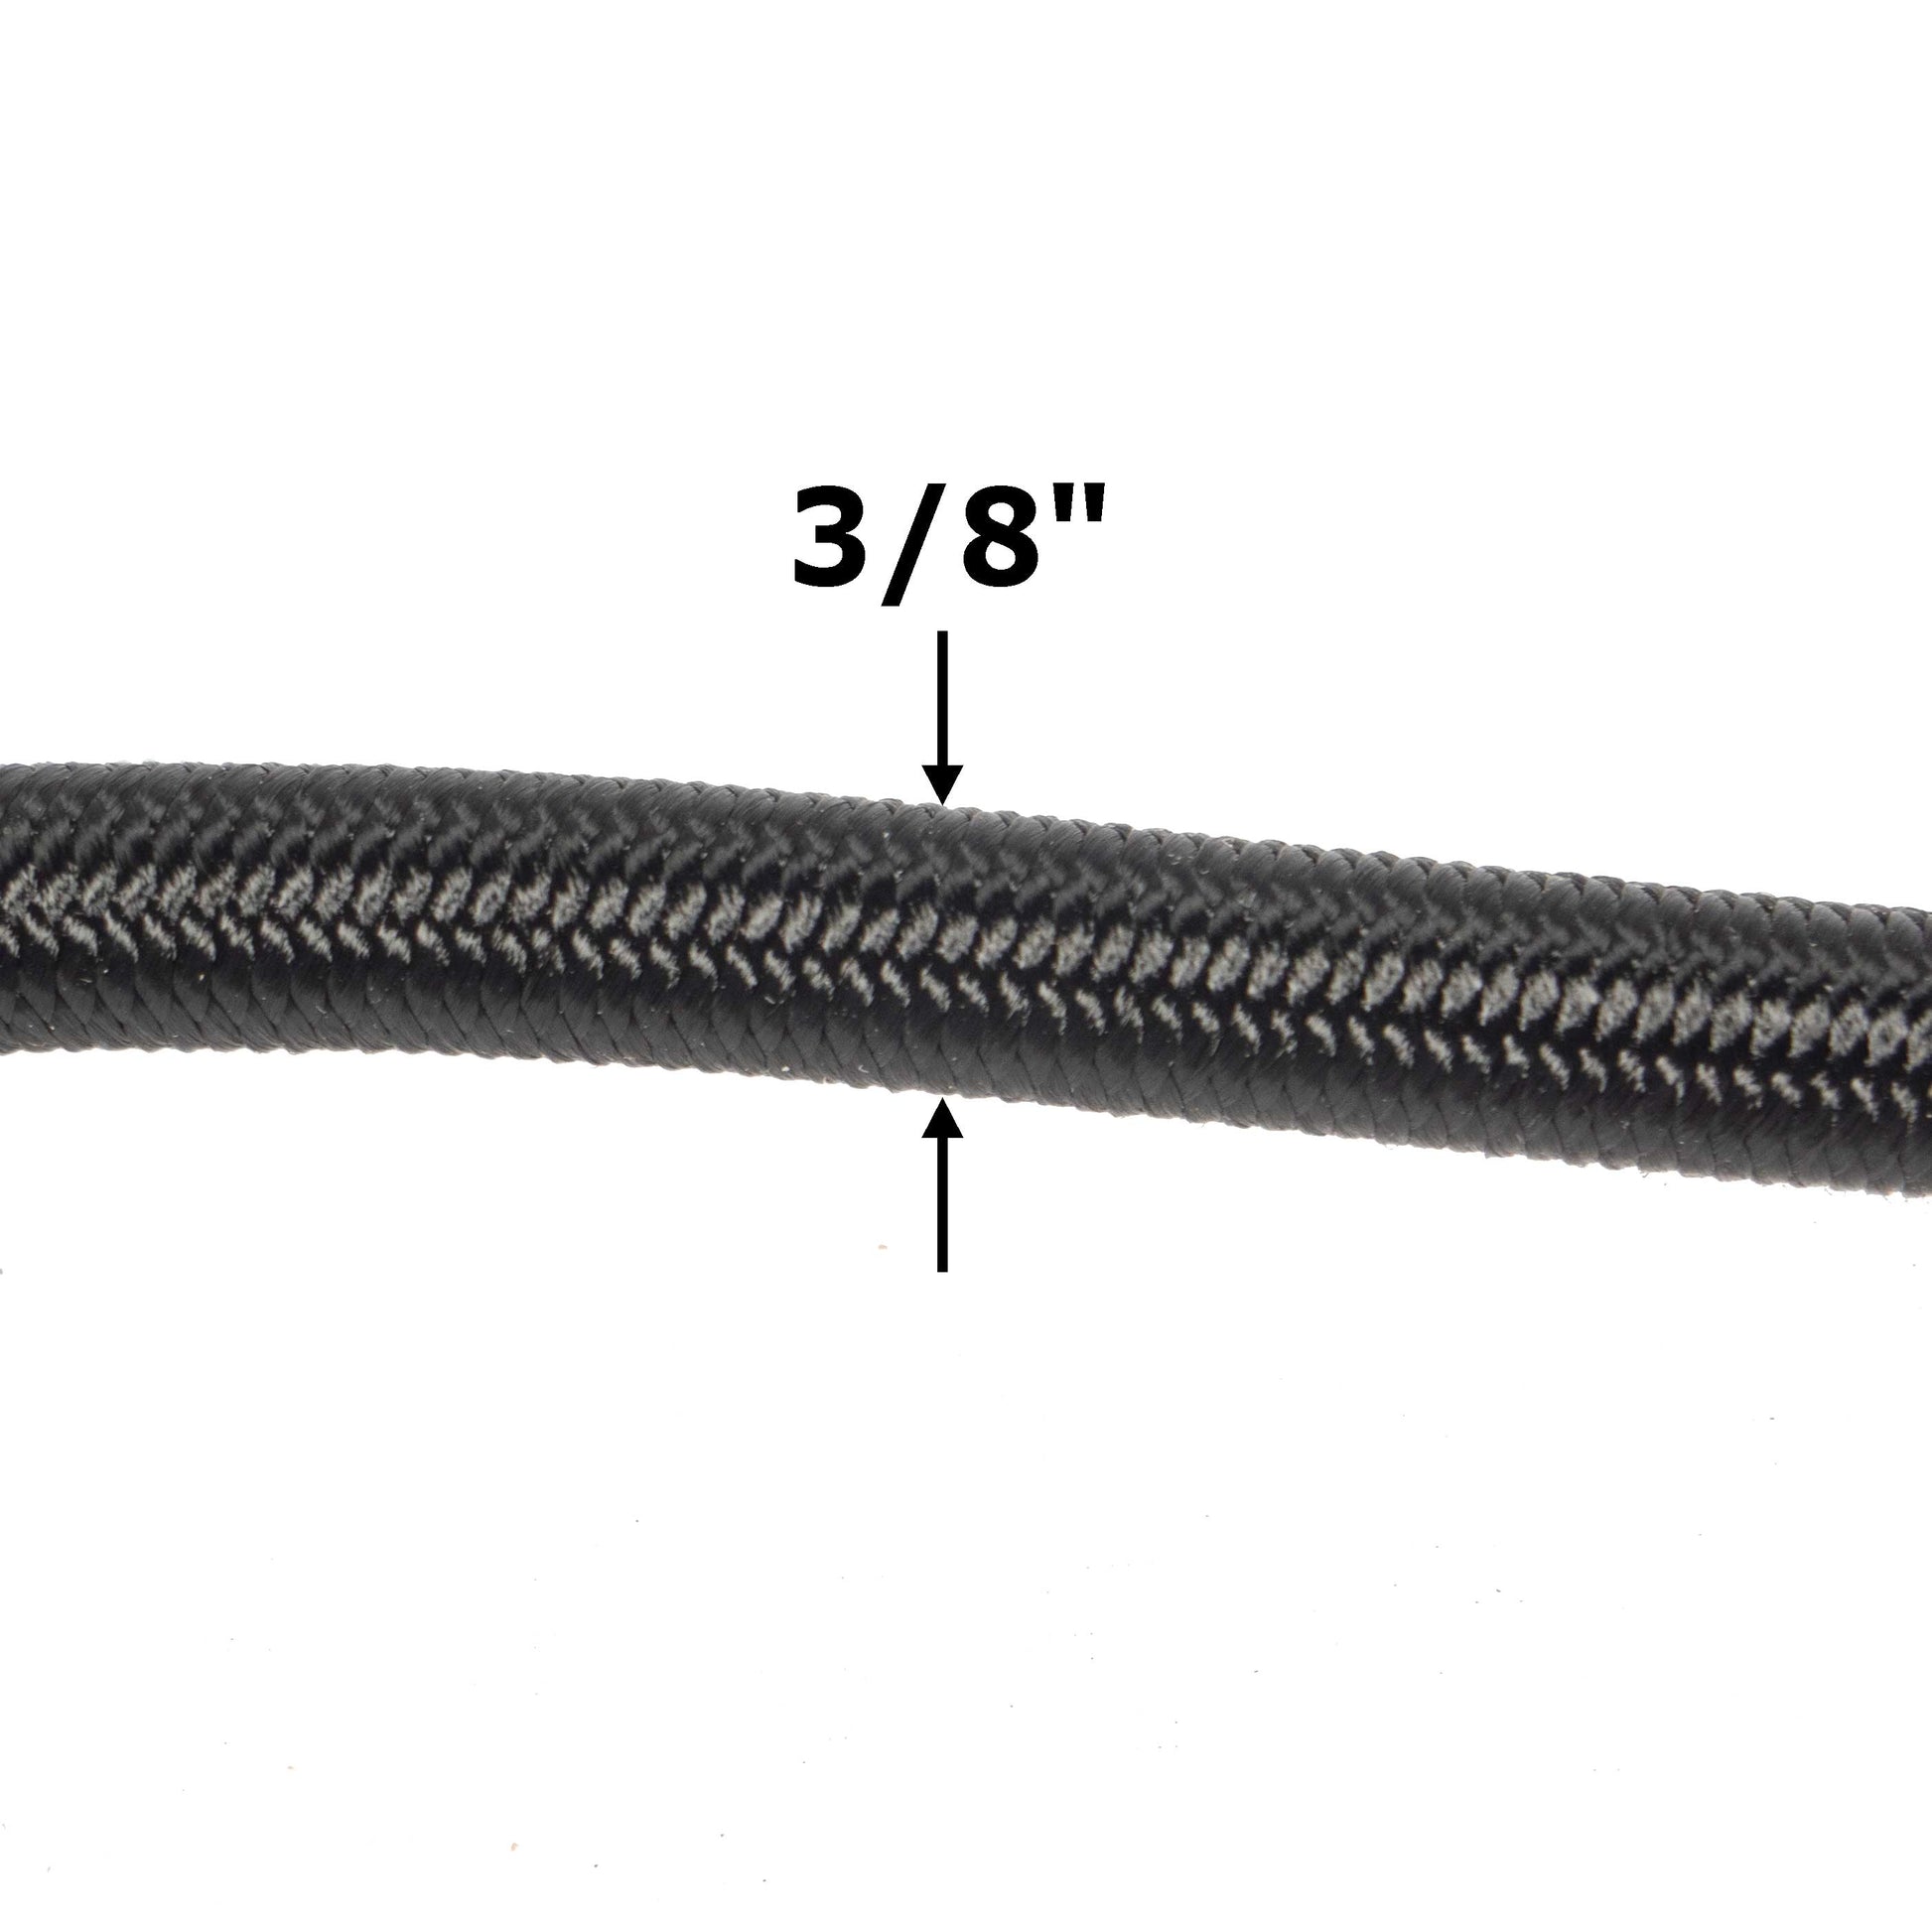 38 foot foot9mm Black Polyester Shock Cord 100 ft image 1 of 6 image 2 of 6 image 3 of 6